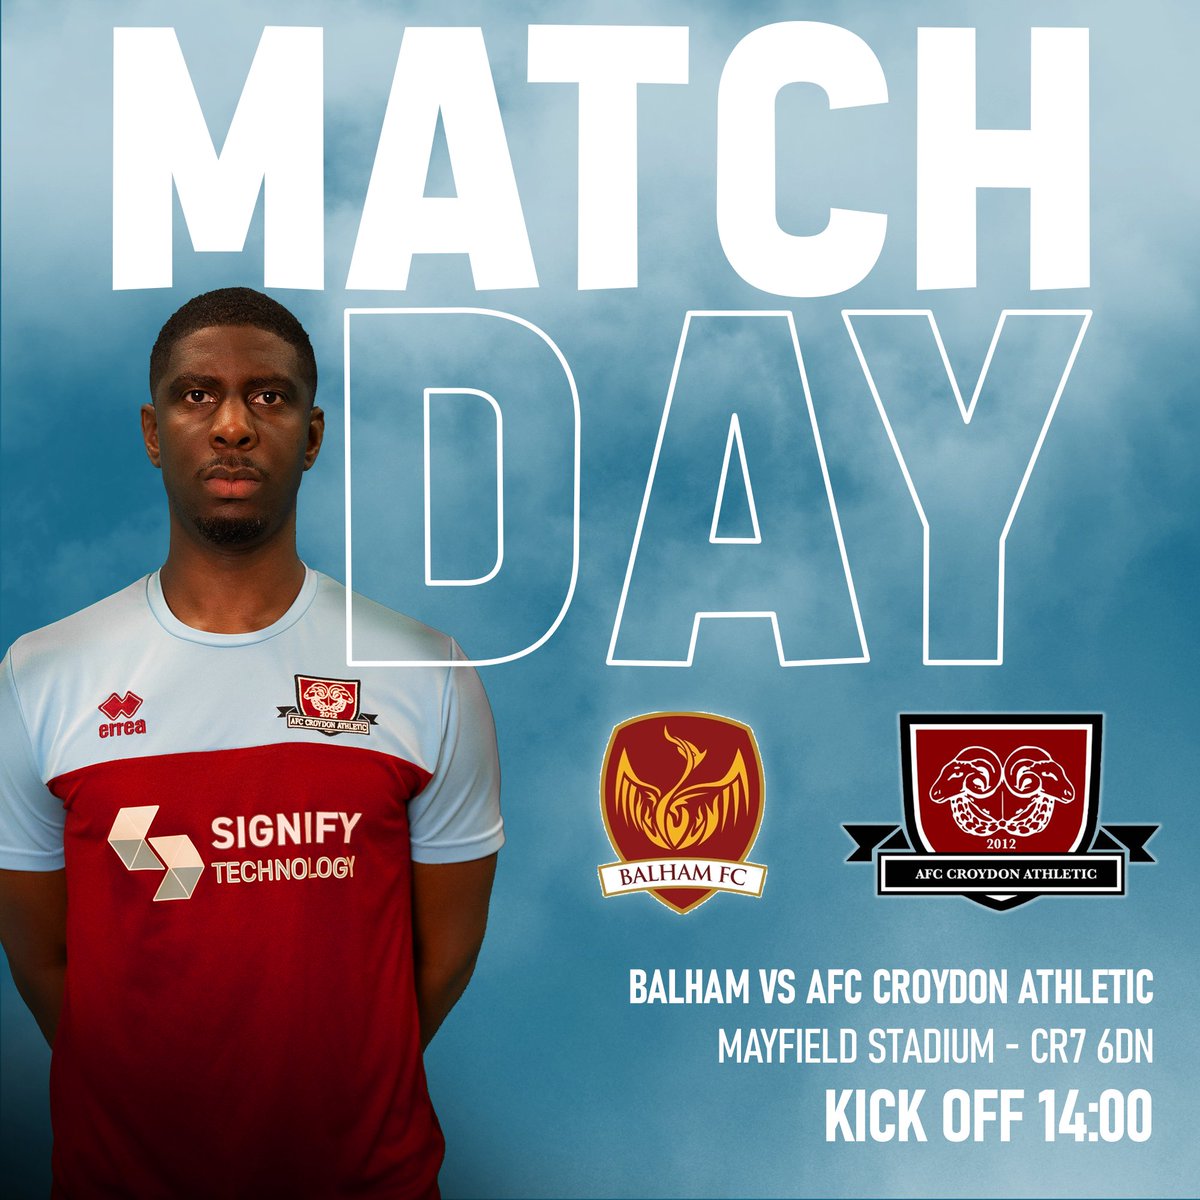 MATCH DAY⚽️IS HERE... Let's get ready to go!

BALHAM FC🆚AFC CROYDON ATHLETIC🐏

Comment🗣️score predictions??

🕑14:00 Kick Off 
📍The Mayfield Stadium CR7 CDN

Make sure to get down for the game!

#uptherams

#afccroydonathletic #croydon #football #weekendfootball